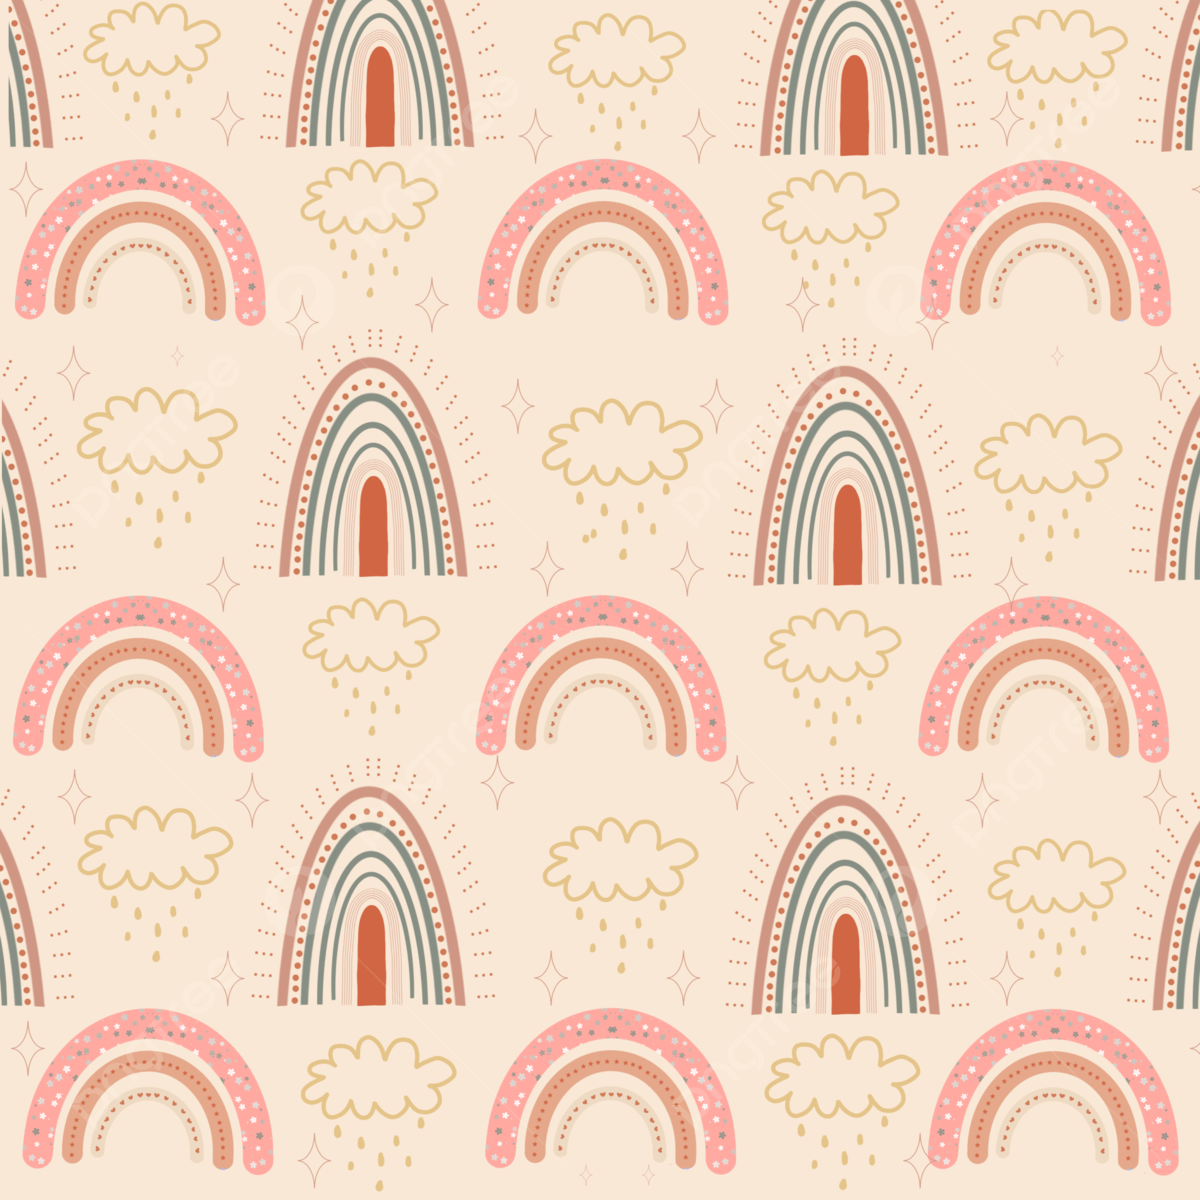 A pattern with rainbows and clouds - Pastel rainbow